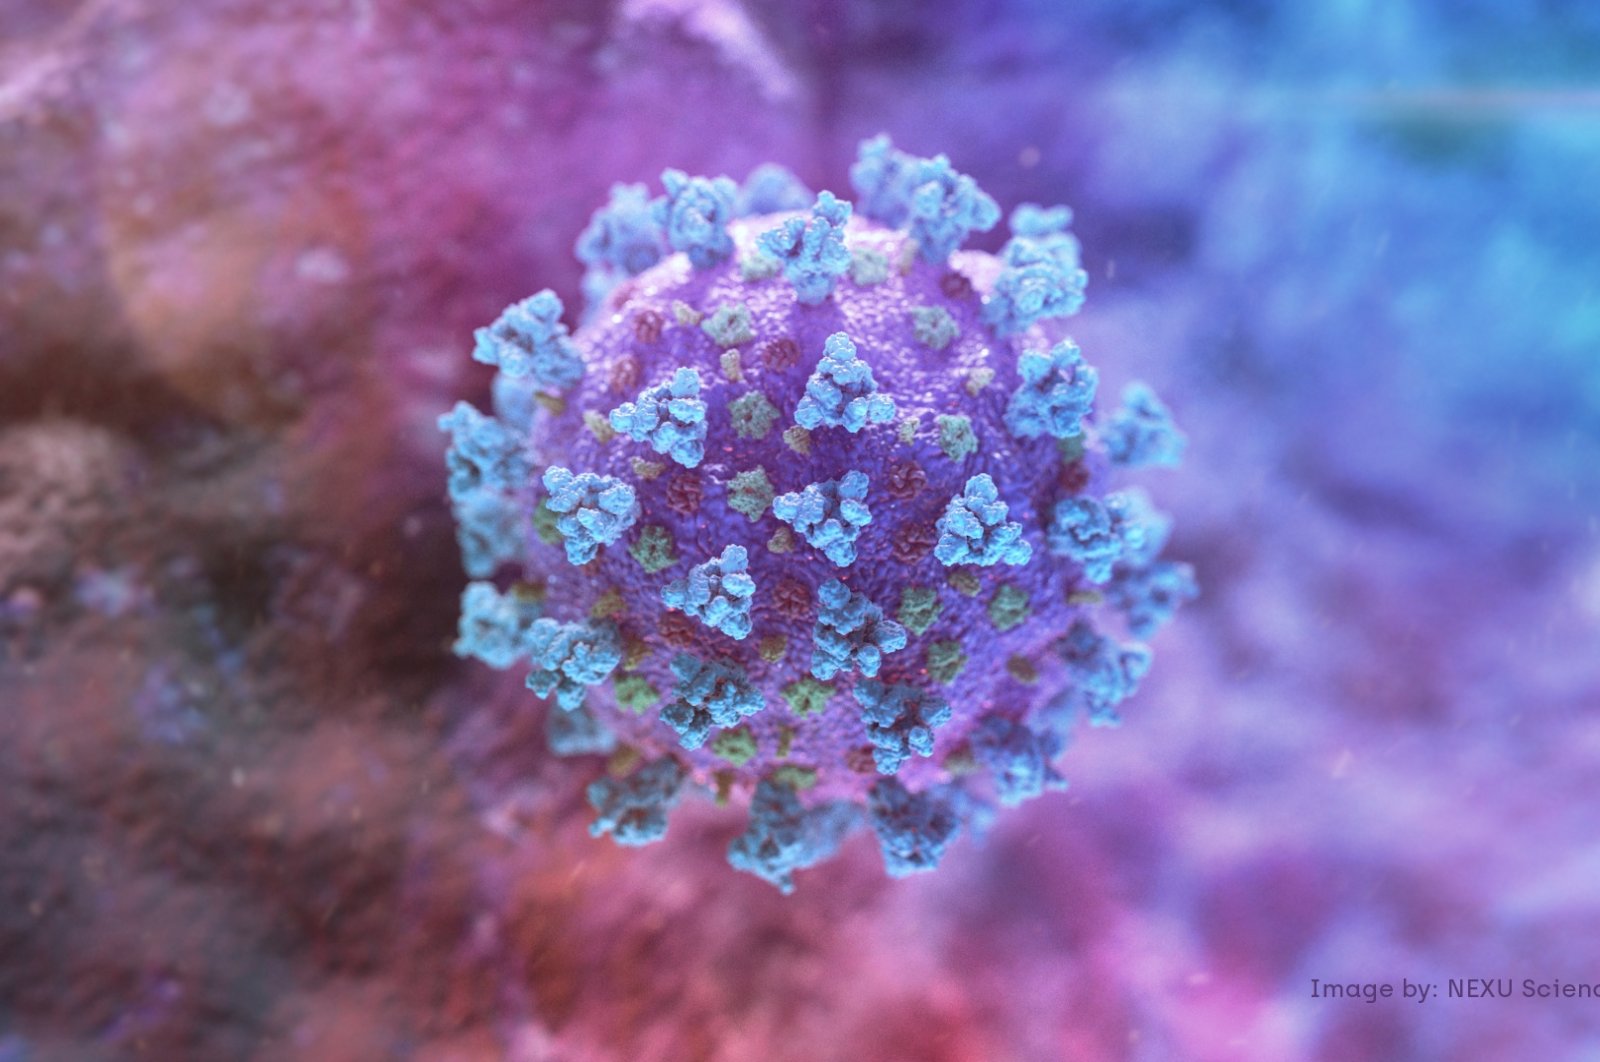 A computer image created by Nexu Science Communication together with Trinity College in Dublin shows a model structurally representative of a betacoronavirus, Feb. 18, 2020. (NEXU Science Communication/via REUTERS)